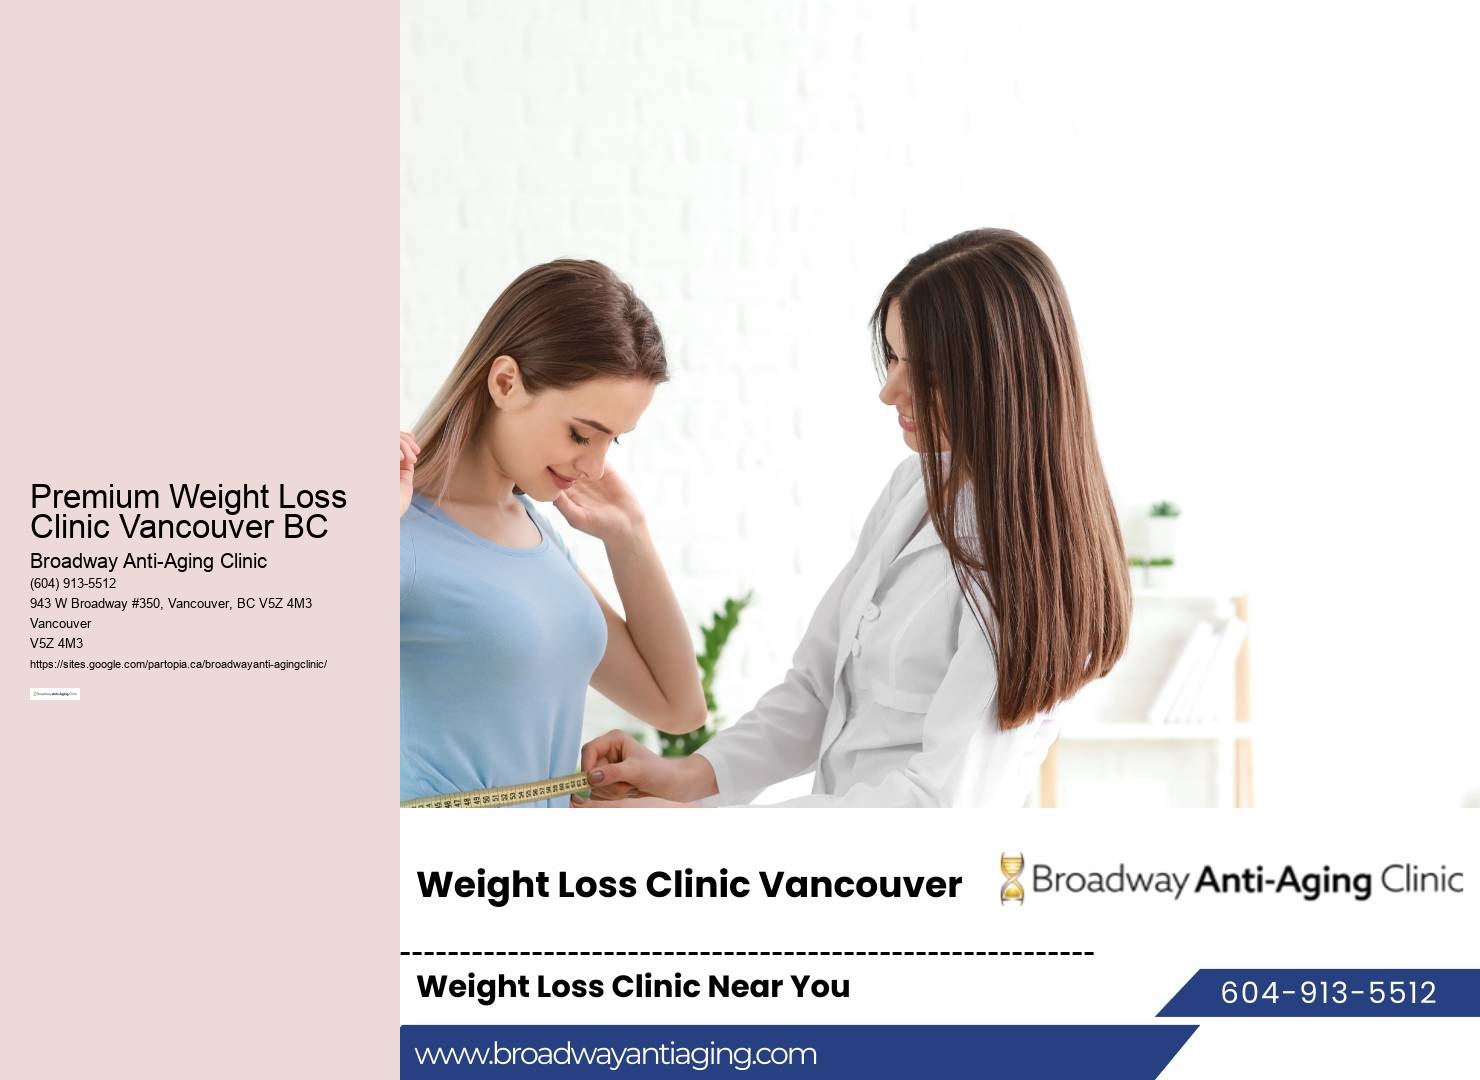 Premium Weight Loss Clinic Vancouver BC